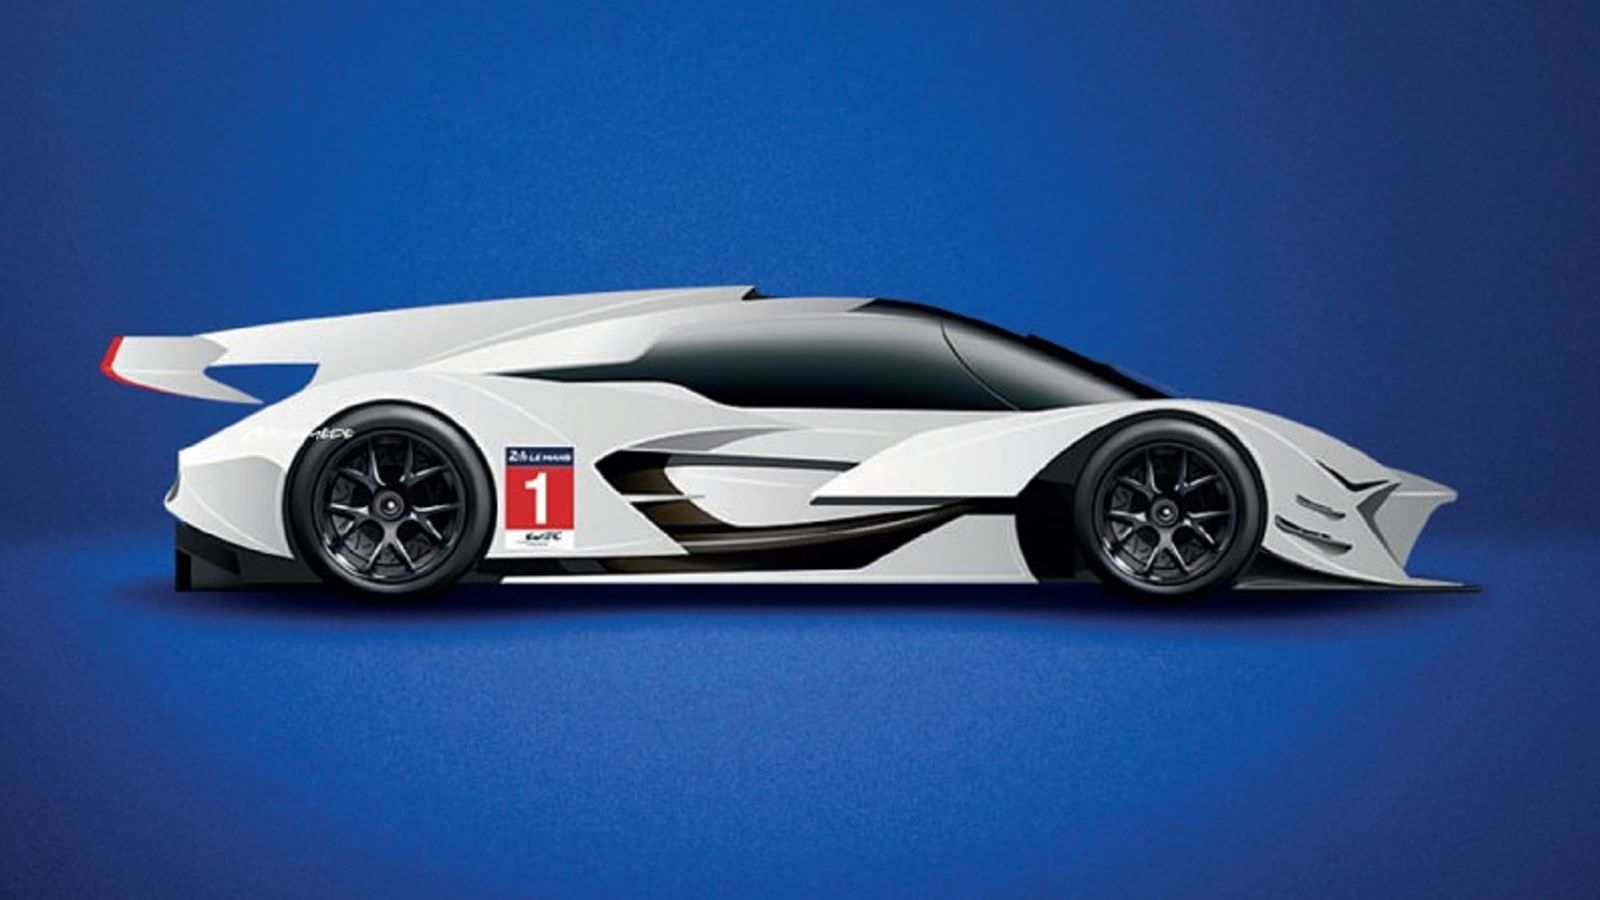 Illustration for article titled WEC goes for hypercars; Aston Martin and Toyota confirmed